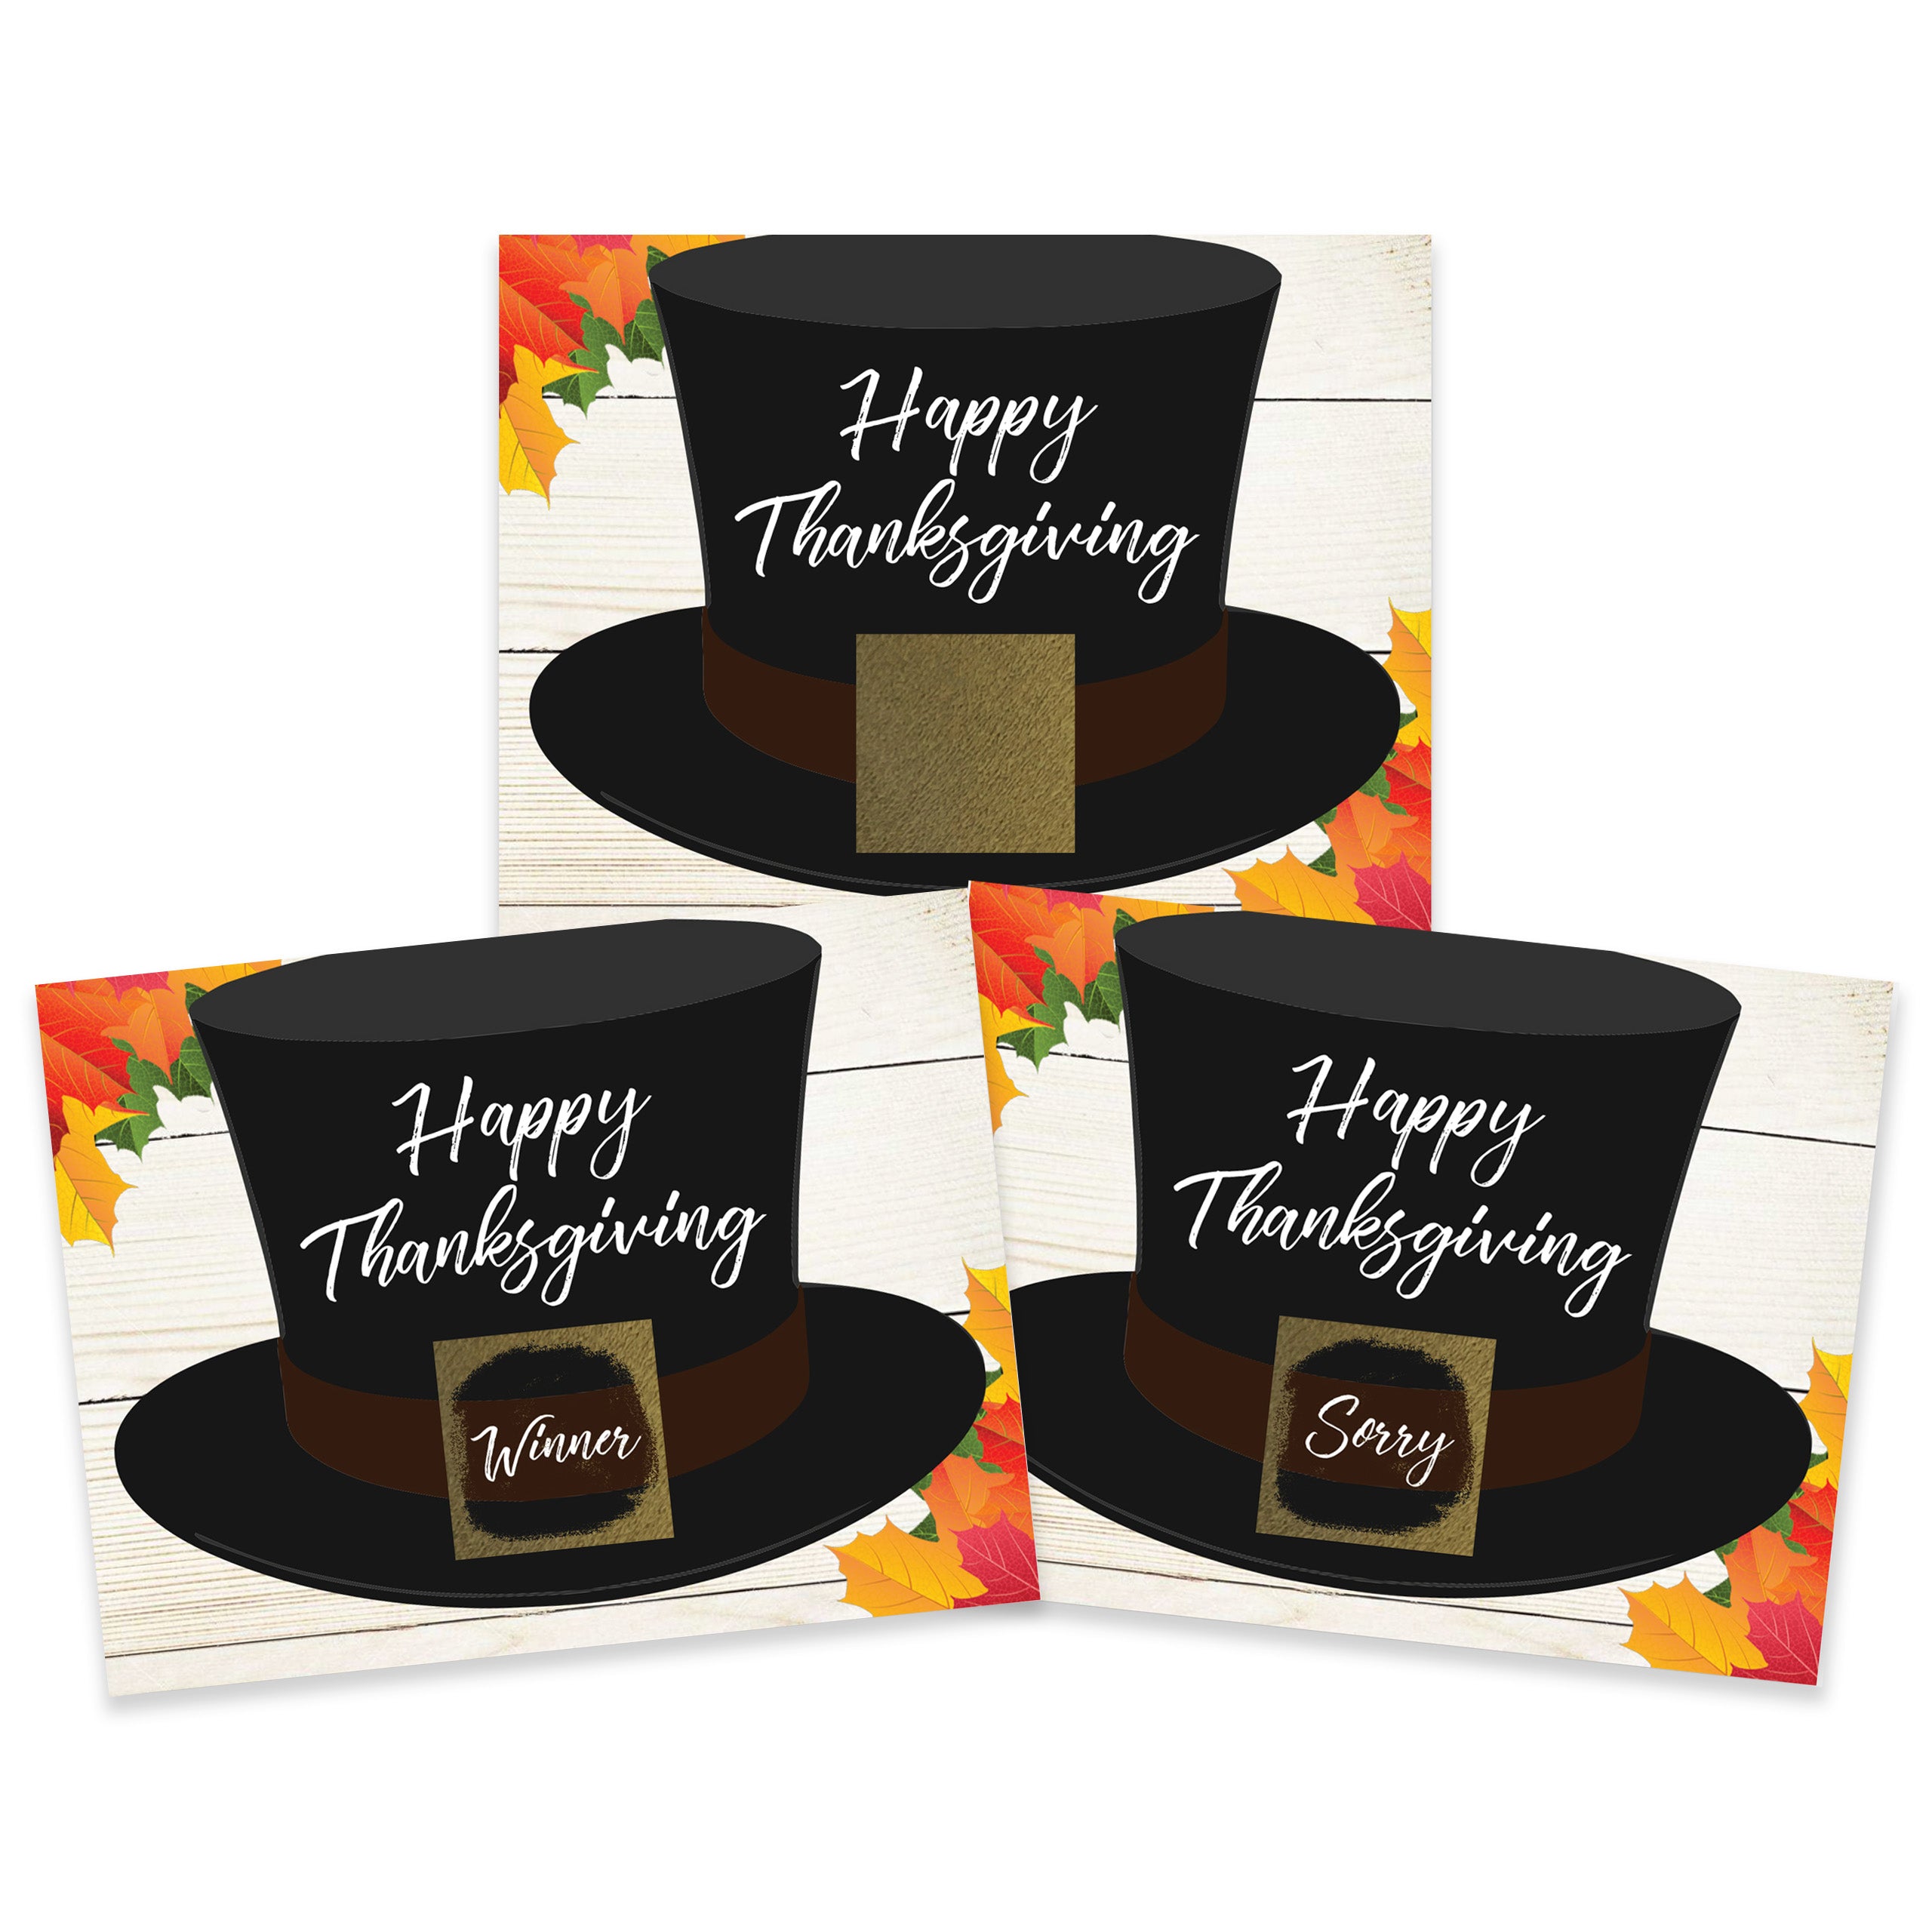 Thanksgiving Pilgrim Hat Game Card 26 Pack - 2 Winning and 24 Non-Winning Cards - My Scratch Offs